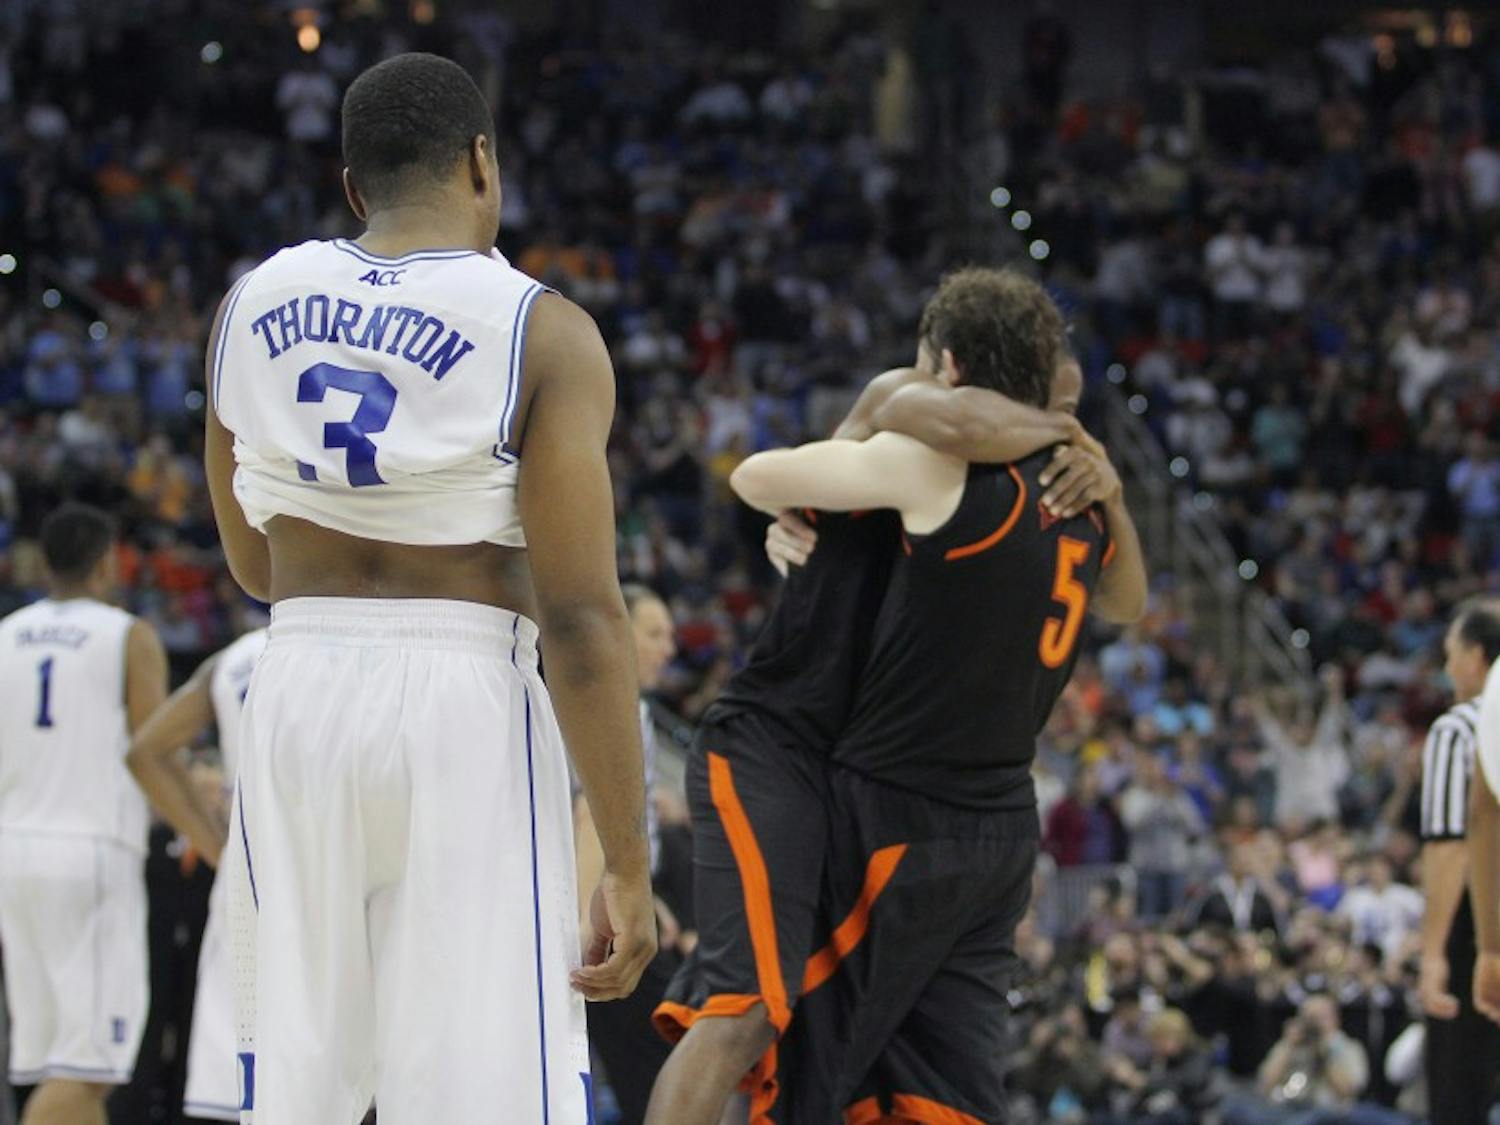 Mercer was left celebrating as the Blue Devils once again failed to make big plays down the stretch.